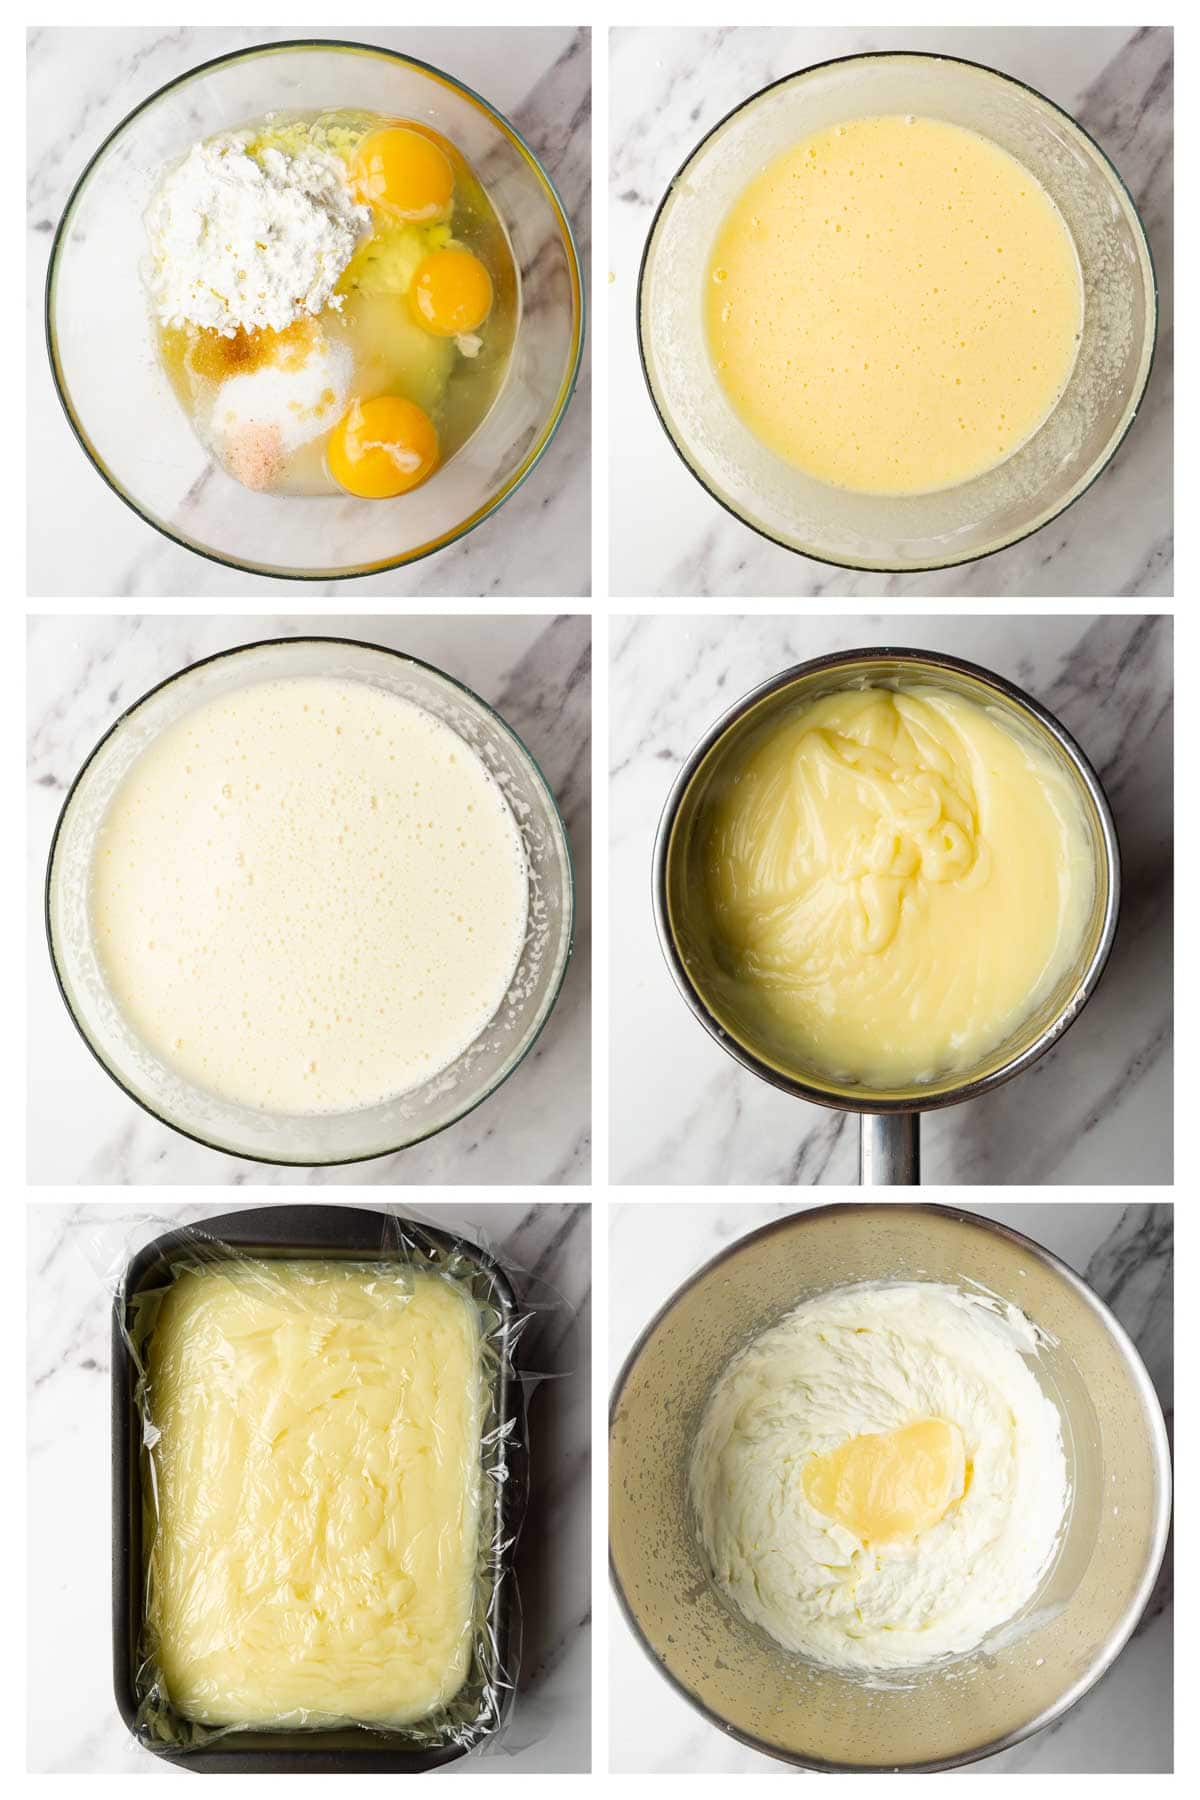 Collage image showing step by step instructions to make pastry cream whipped with heavy cream.